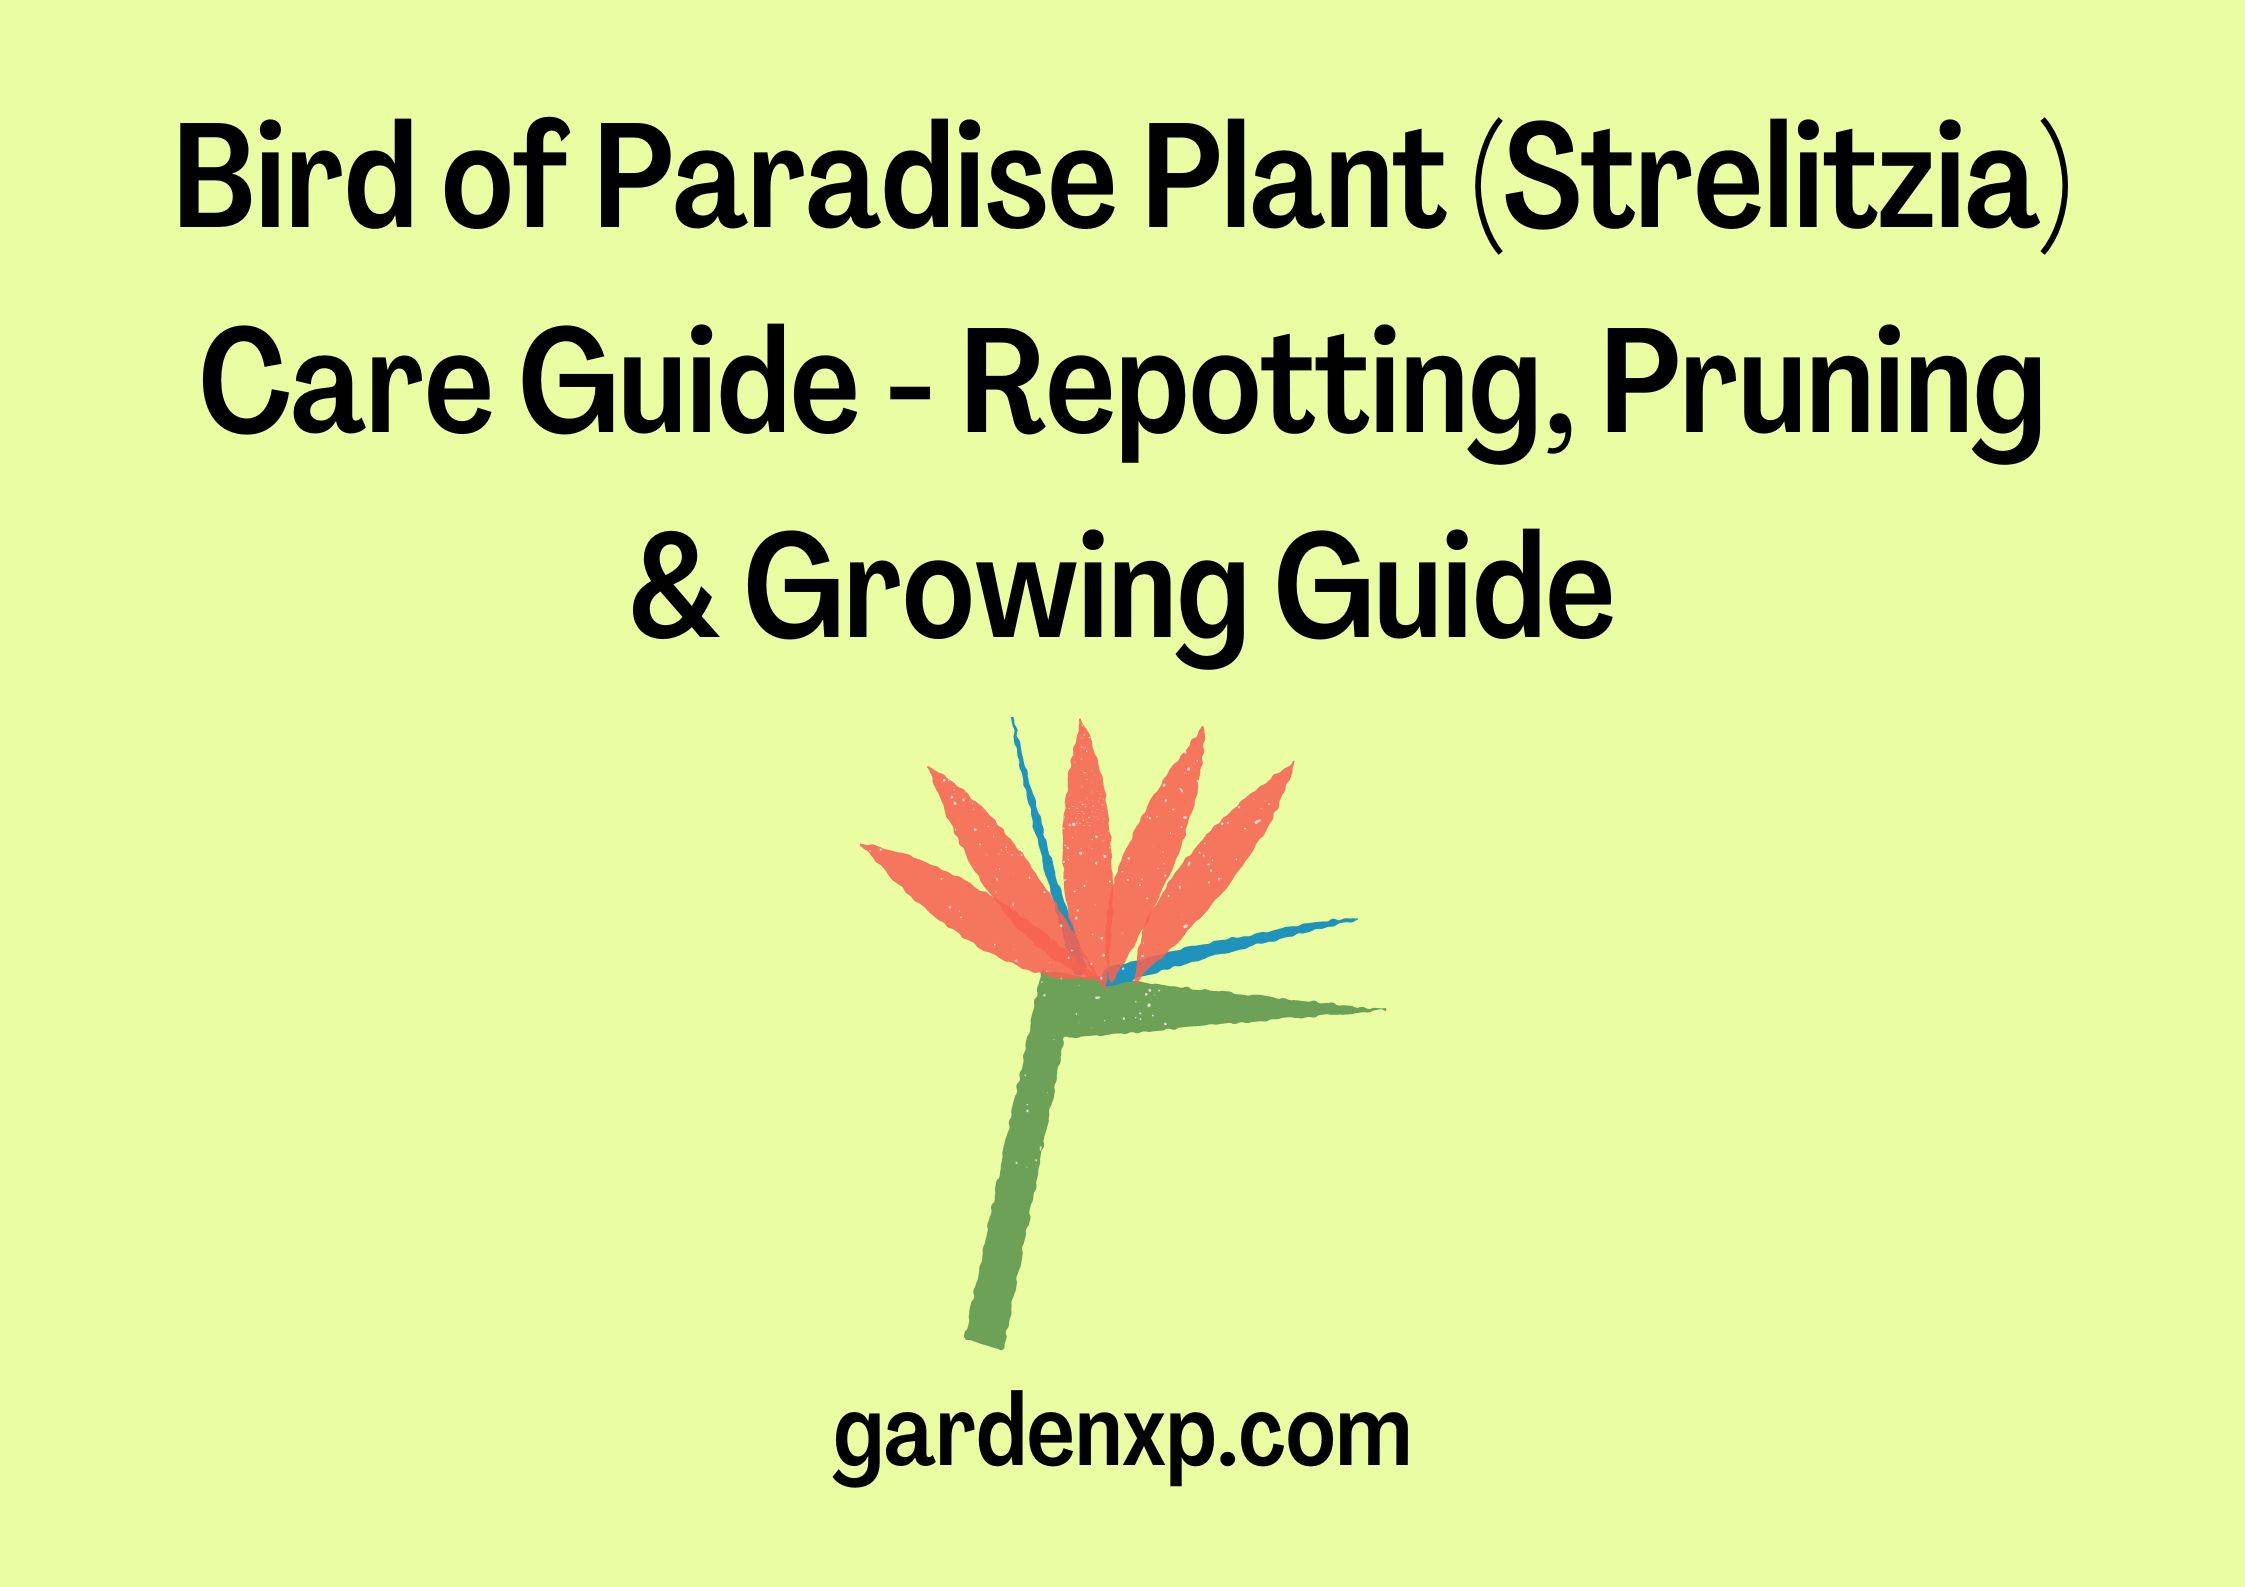 Bird of Paradise Plant (Strelitzia) Care Guide - Repotting Pruning & Growing Guide